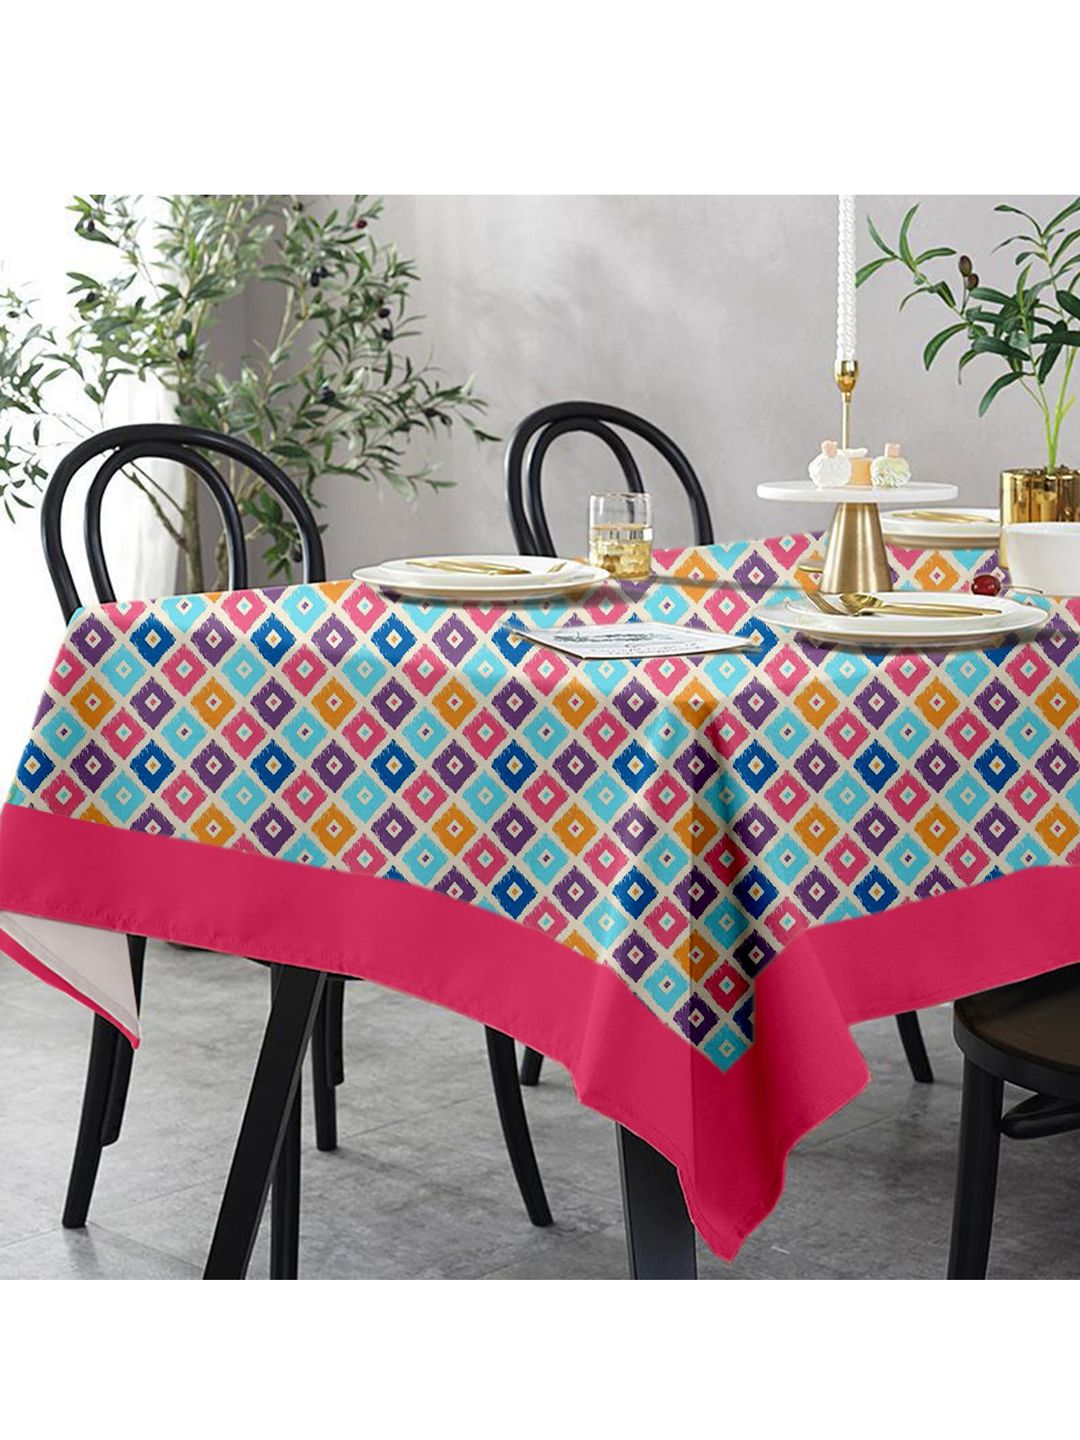 Lushomes Pink & Green 8 Seater Square Printed Table Cloth Price in India